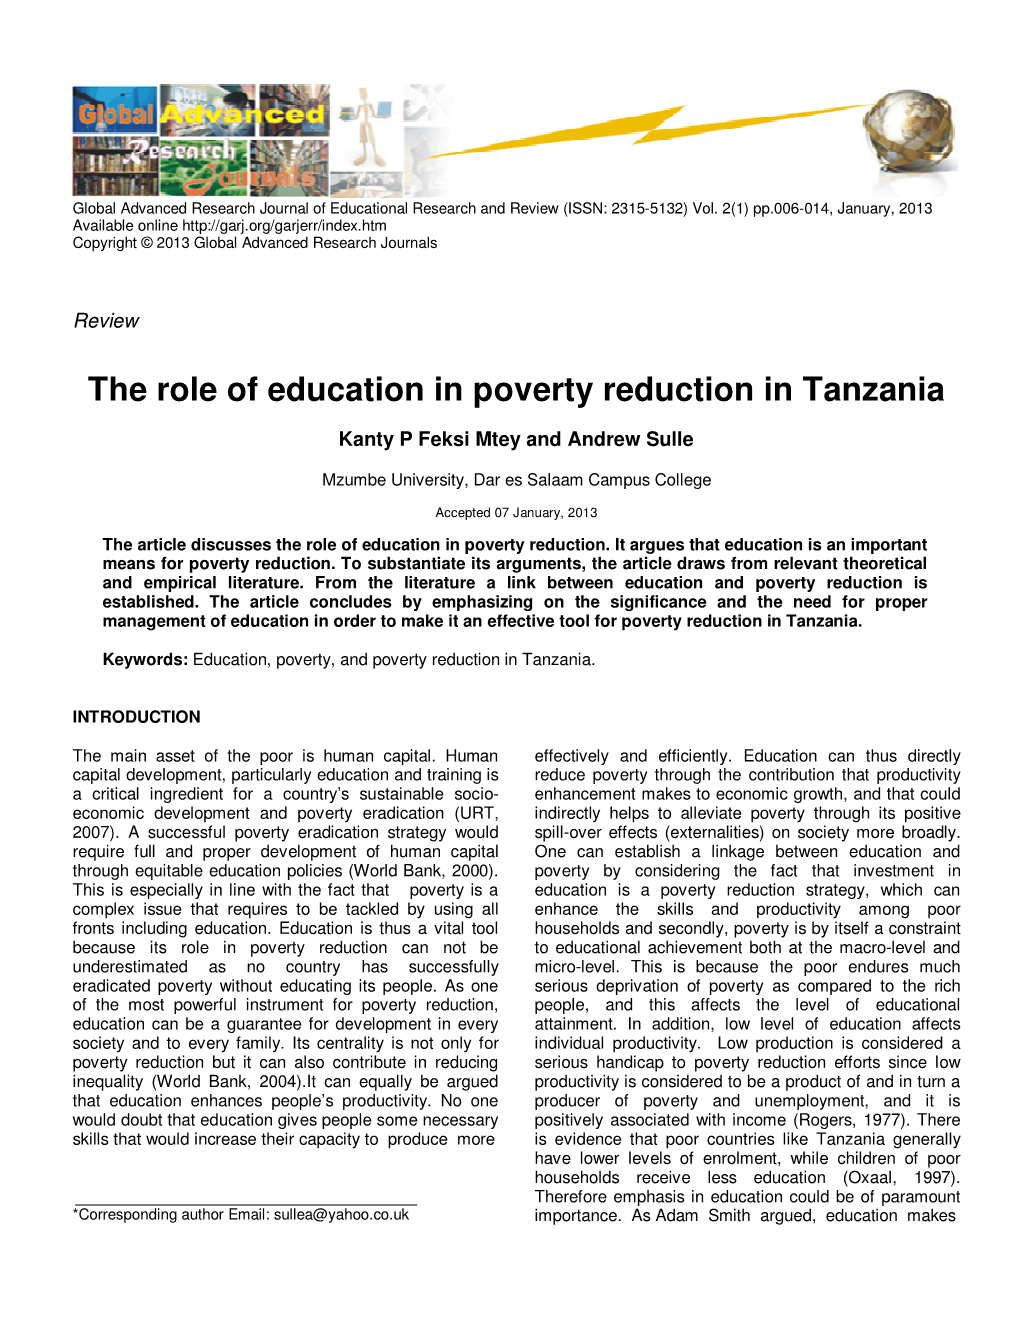 The Role of Education in Poverty Reduction in Tanzania